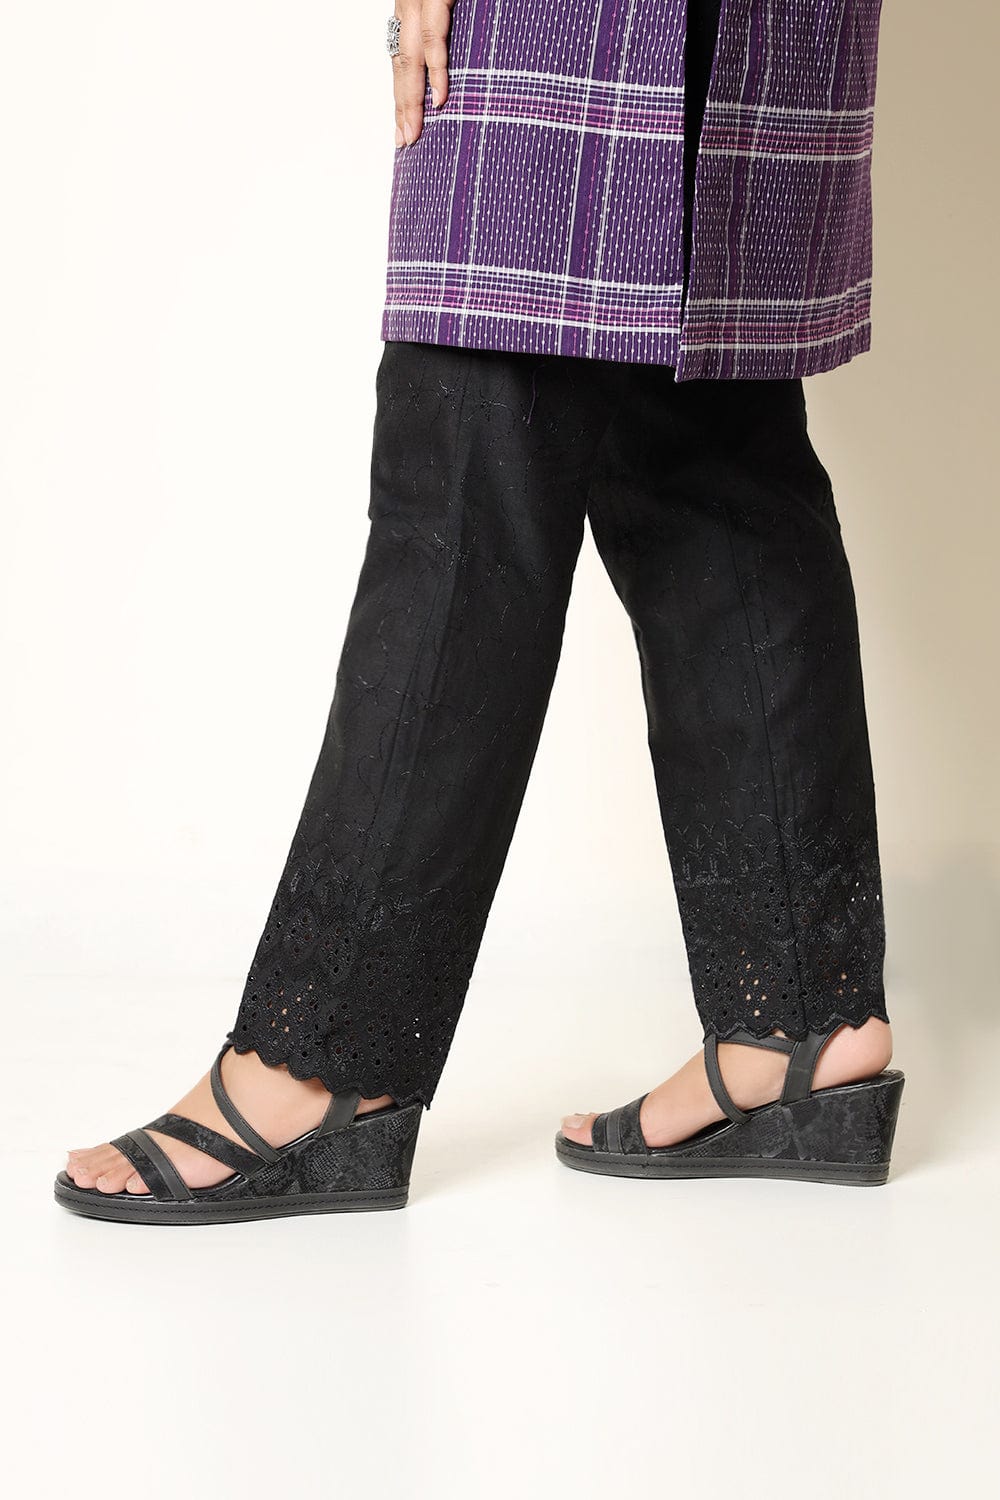 Hope Not Out by Shahid Afridi Eastern Women Trousers Chikan Kari Trouser